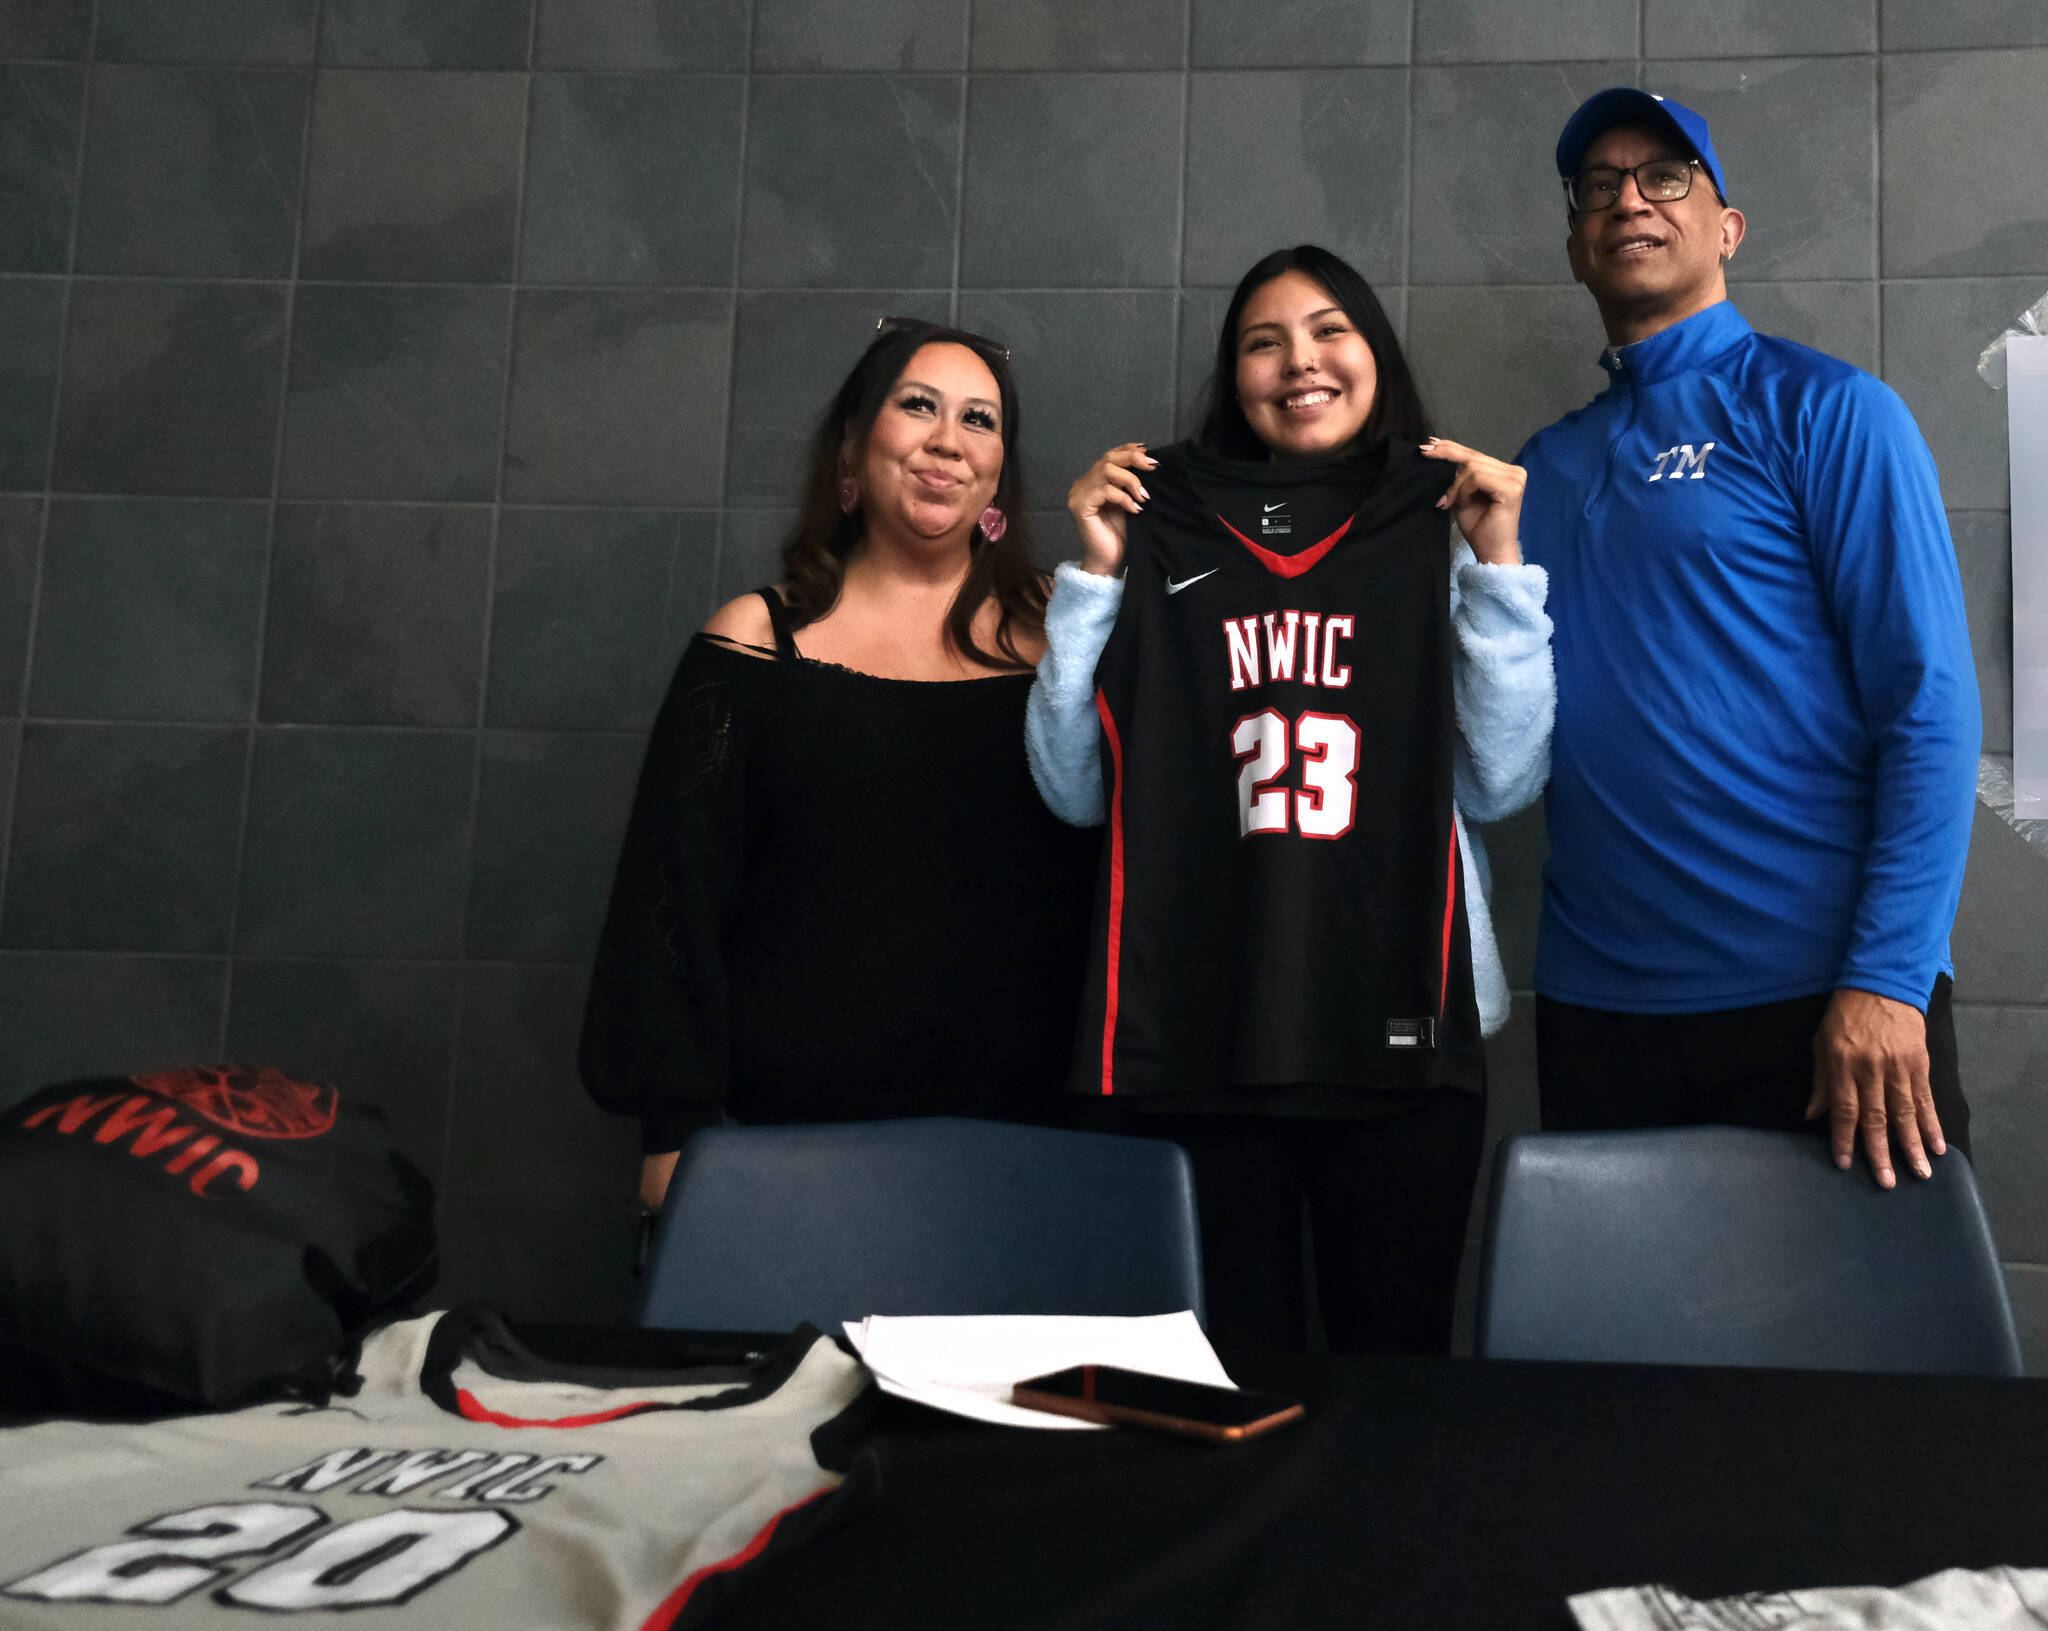 Thunder Mountain High School senior Kiara Kookesh holds a Northwest Indian College jersey after signing to play college basketball for the Bellingham, Washington, school on Monday while flanked by her mother Marcie Kookeshand TMHS coach Andy Lee. (Klas Stolpe / Juneau Empire)